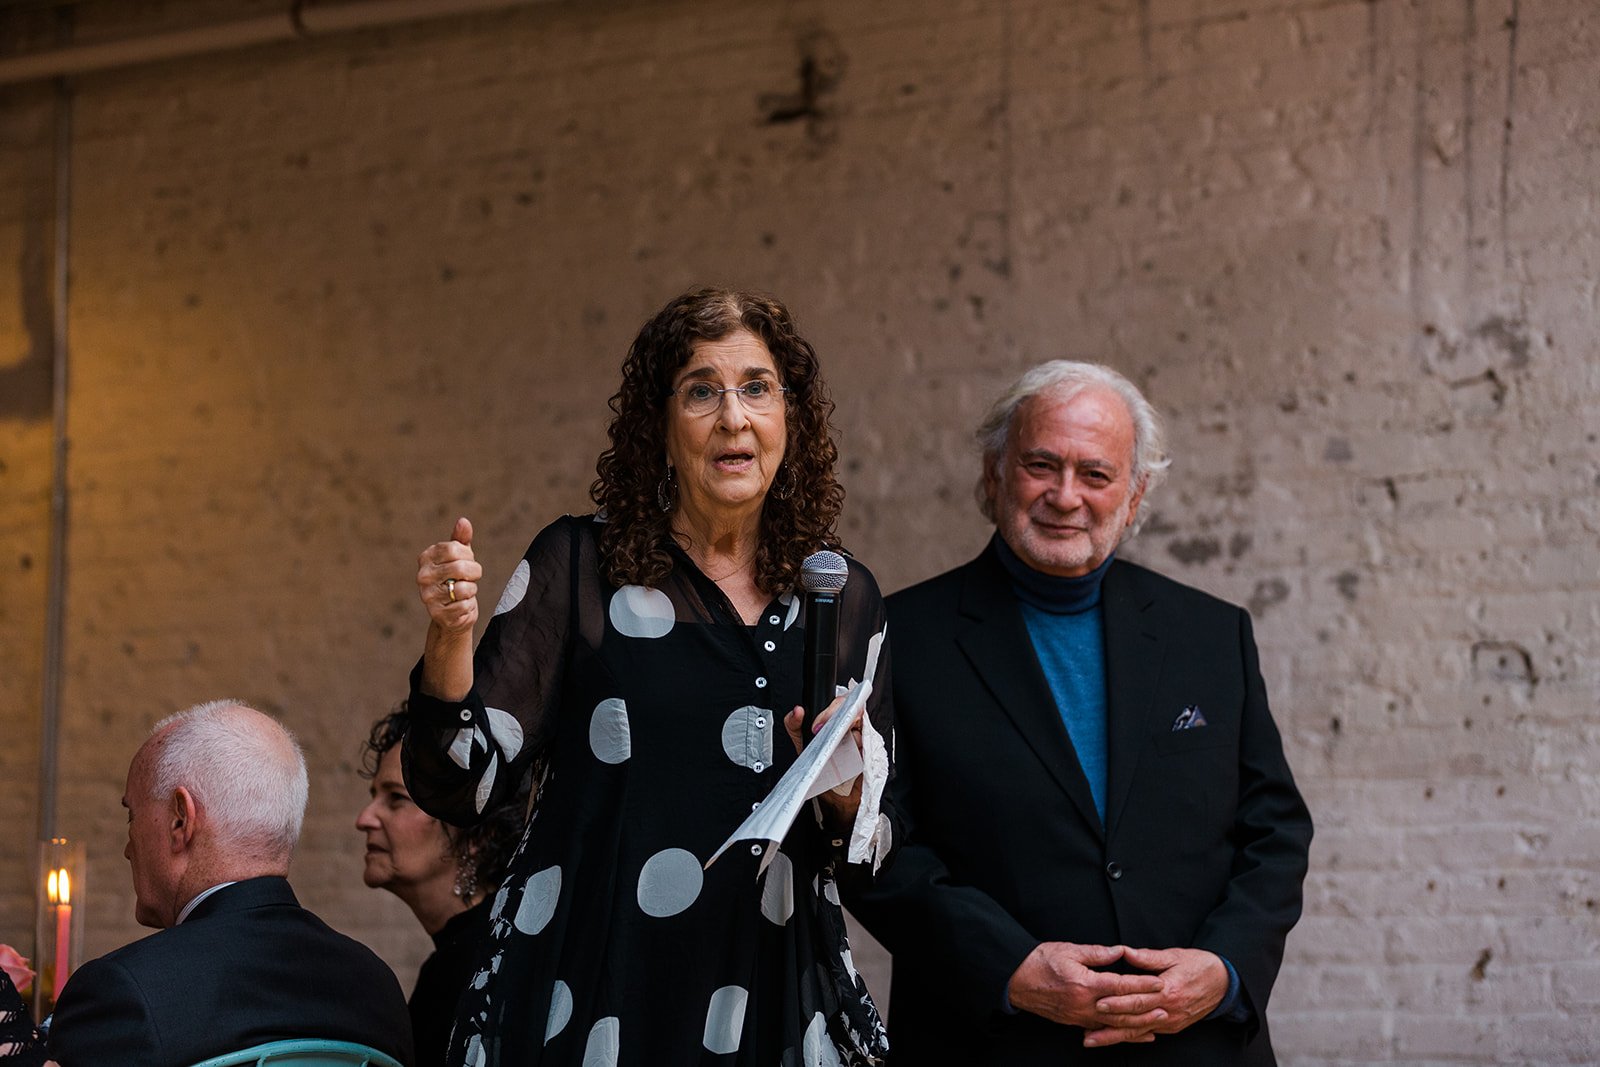  Documentary candid photo of bride’s parents giving a toast during the reception at nontraditional Jewish and Venezuelan wedding at The Joinery Chicago an Industrial loft wedding venue In Logan Square.  